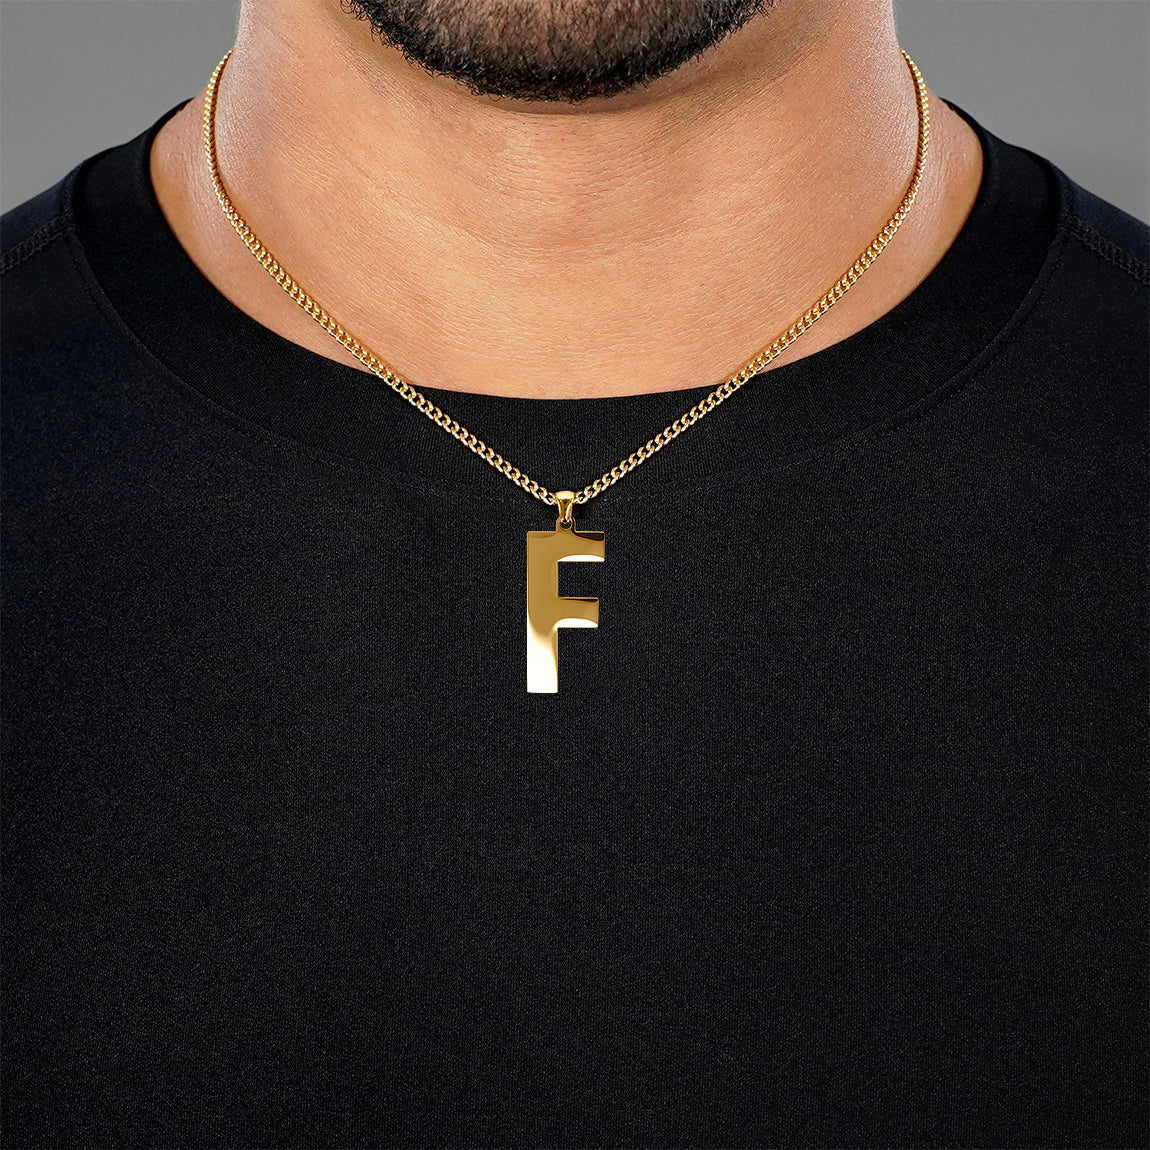 F Letter Pendant with Chain Necklace - Gold Plated Stainless Steel